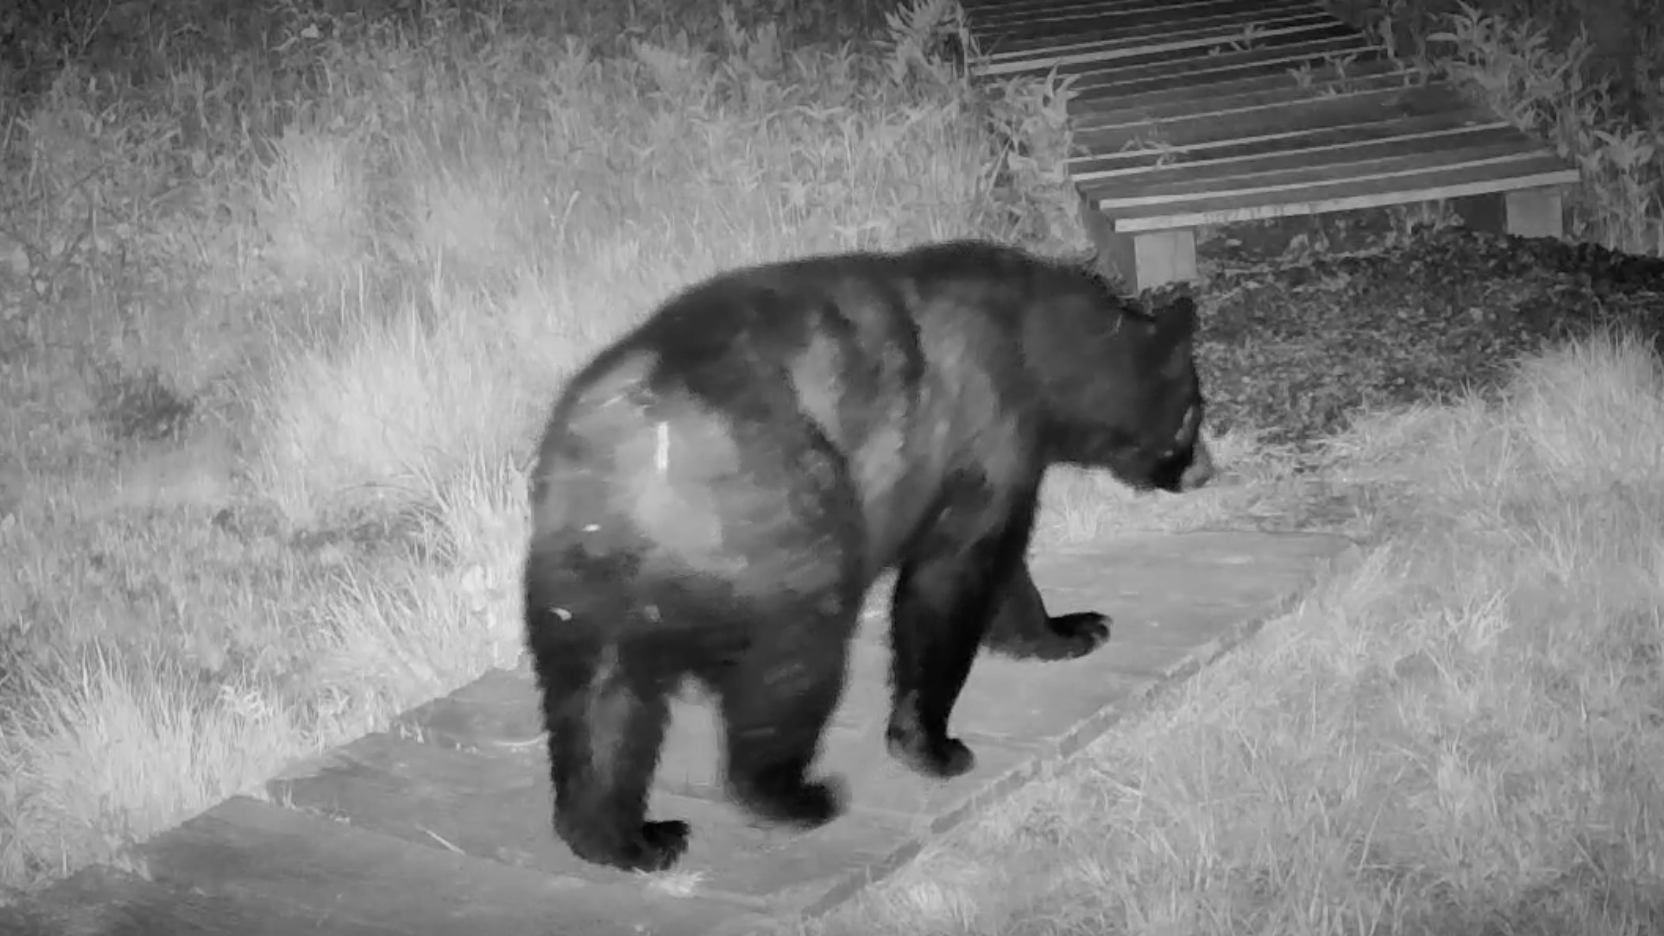 A black bear captured on a trail cam at night